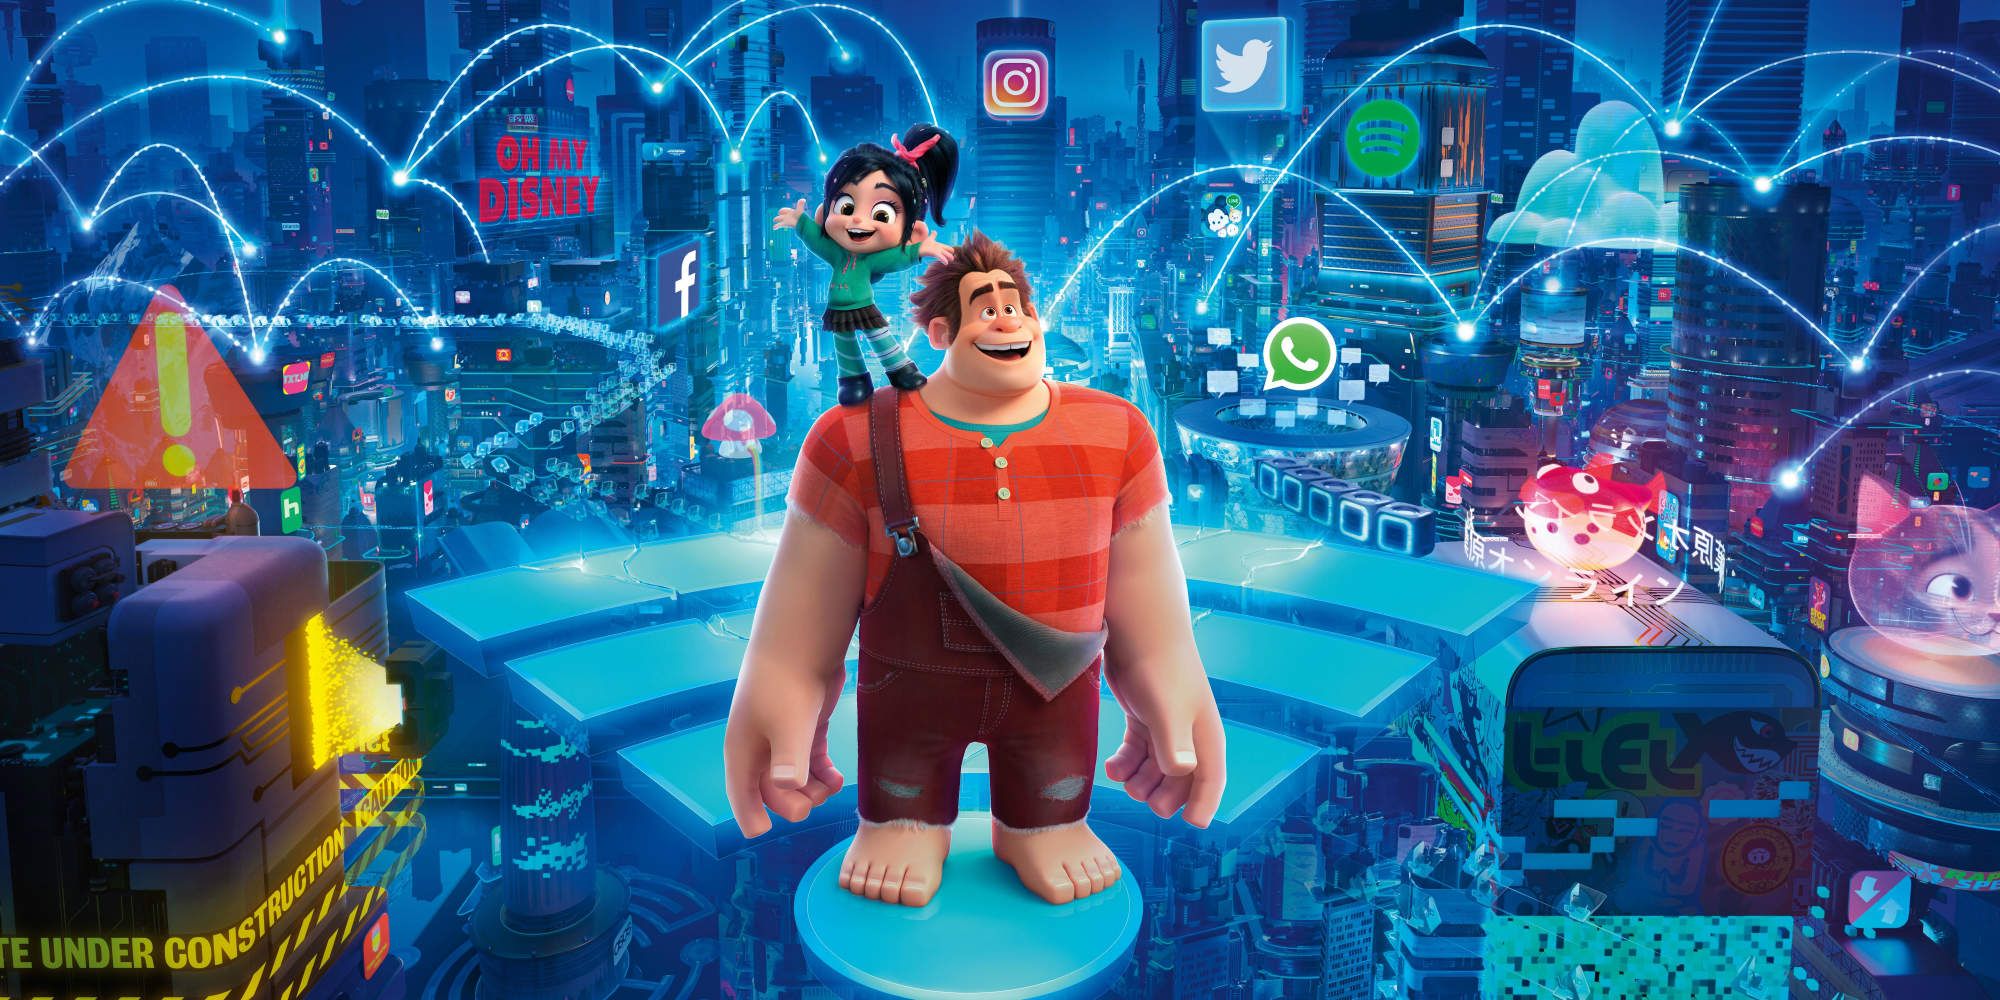 Ralph Breaks the Internet Movie Review